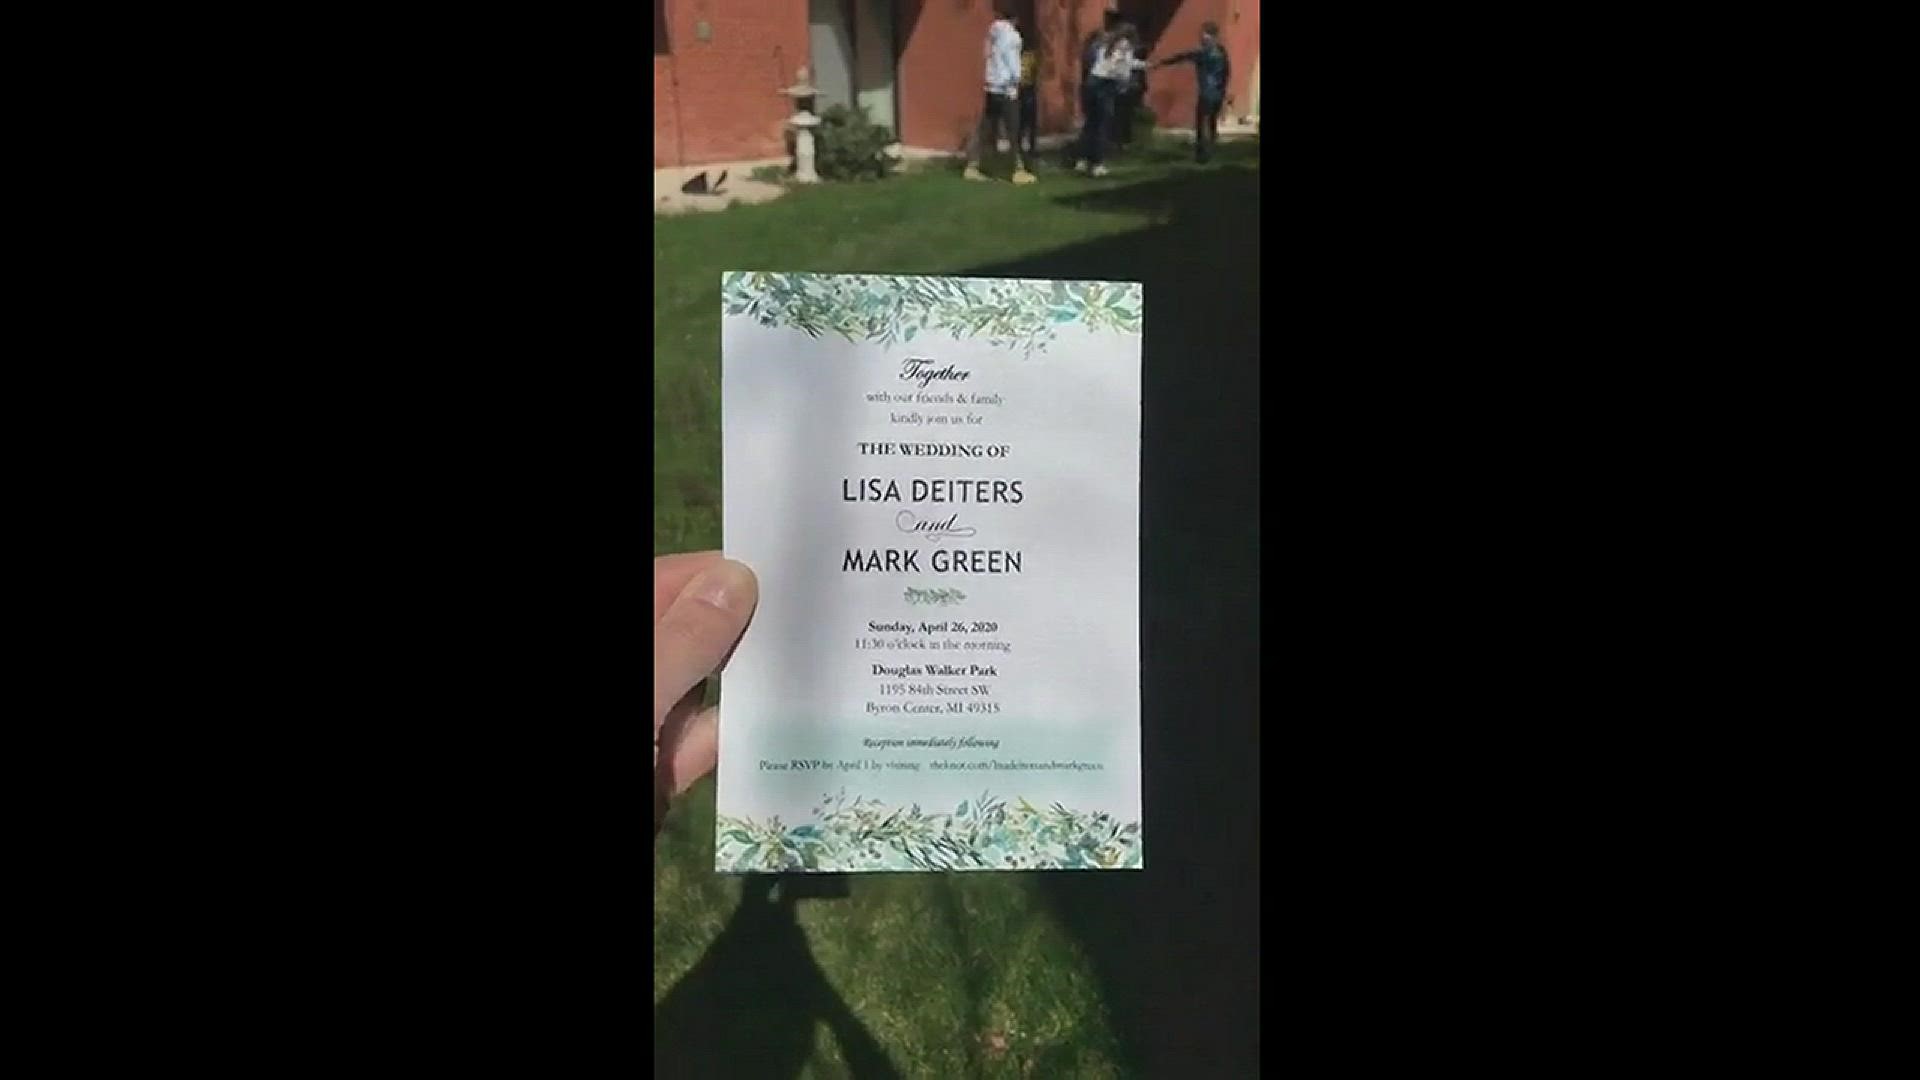 Attendance was small at Lisa and Mark's wedding, due to COVID-19. A family friend broadcast the nuptials on Facebook Live so those not able to make it, could see it.